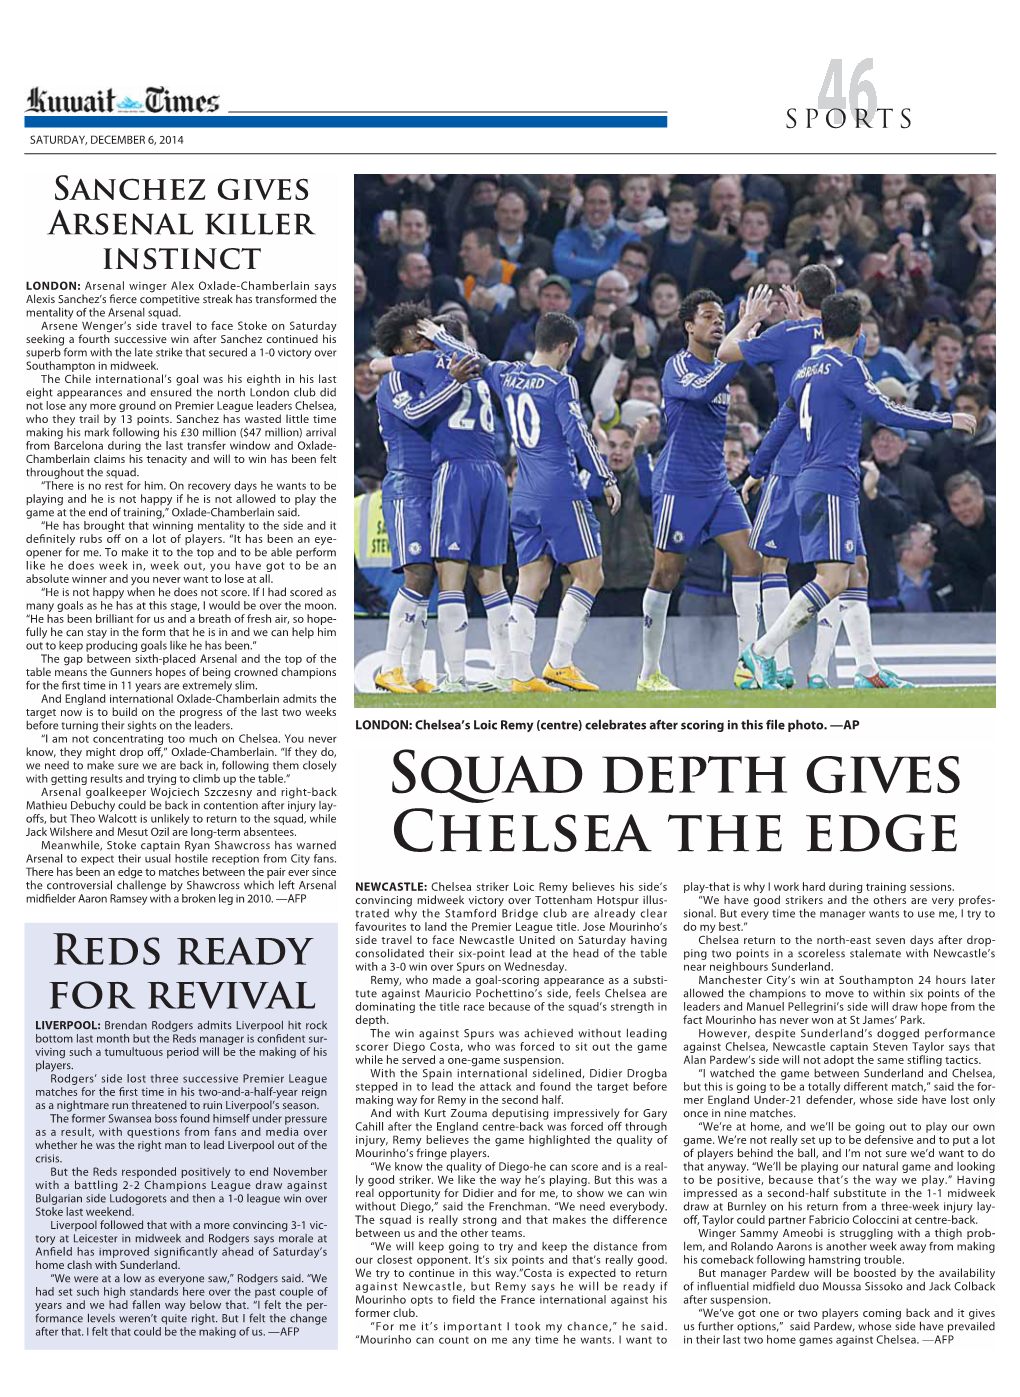 Squad Depth Gives Chelsea the Edge